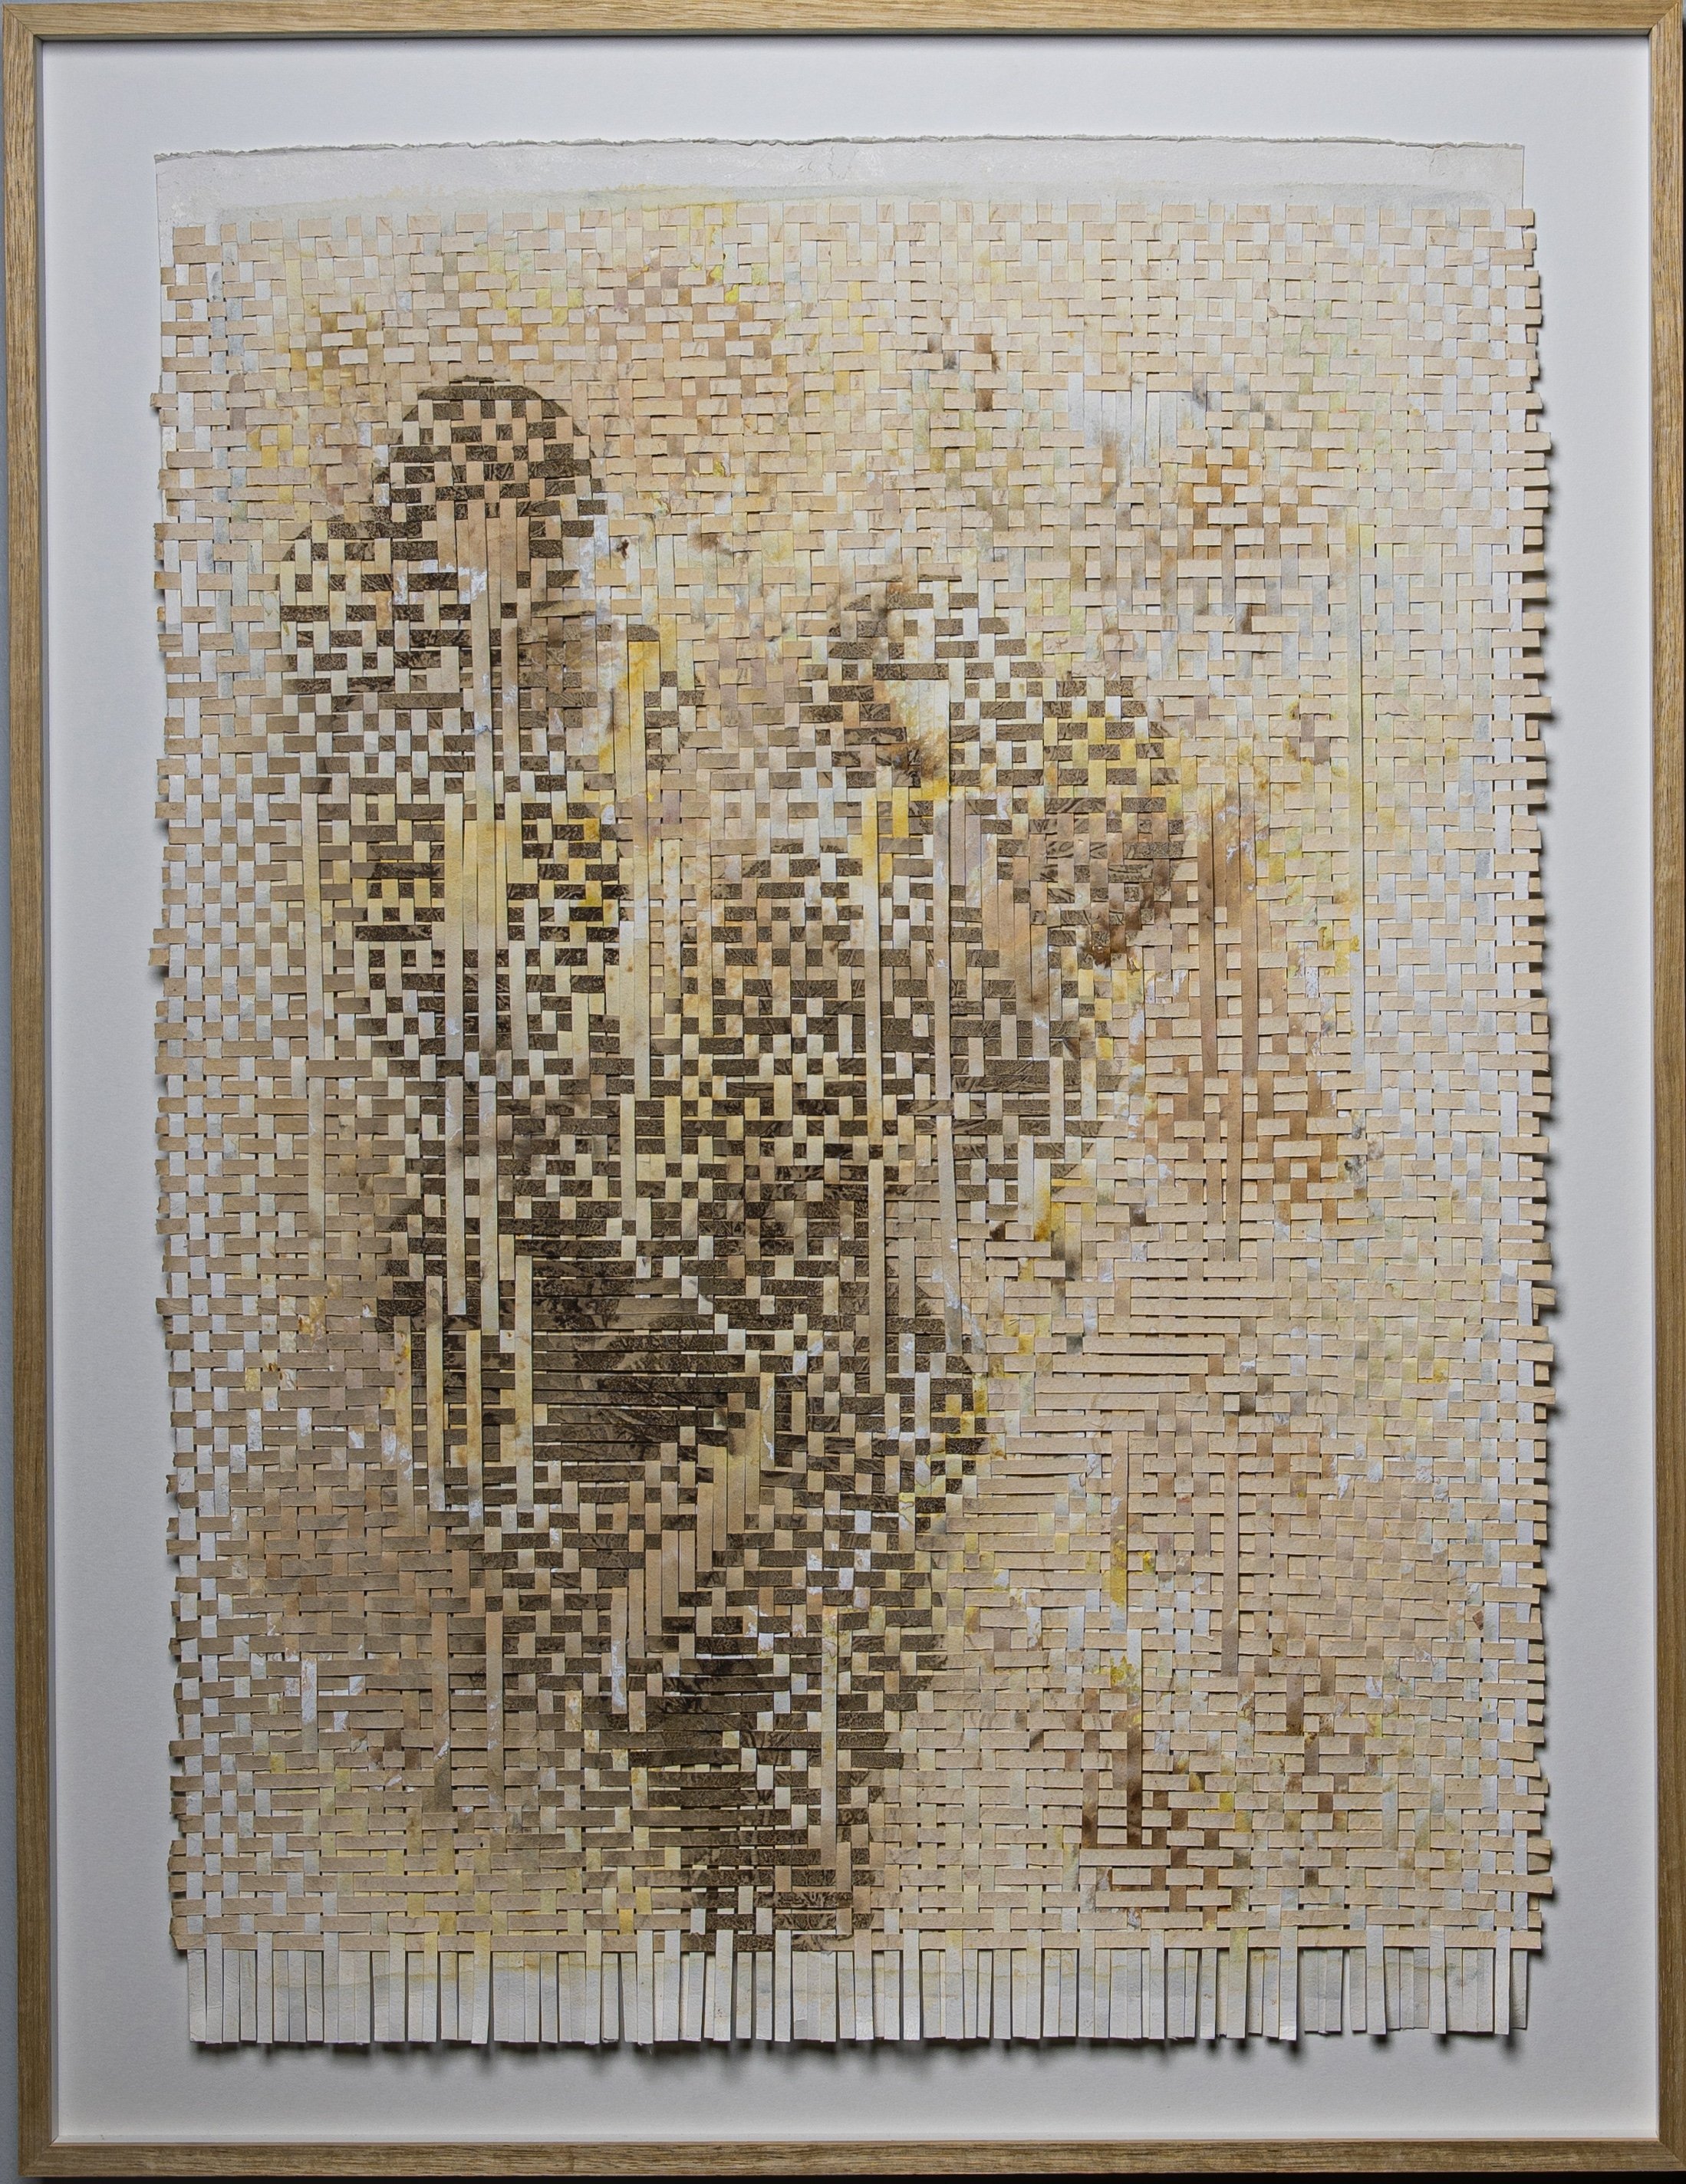 'Breath,' 2021, woven painting, cotton paper, natural ink from safflower and walnut, mineral salts, eucalyptus botanical print, 54.5 by 78 centimeters. (Courtesy of Umut Özge Balkan)